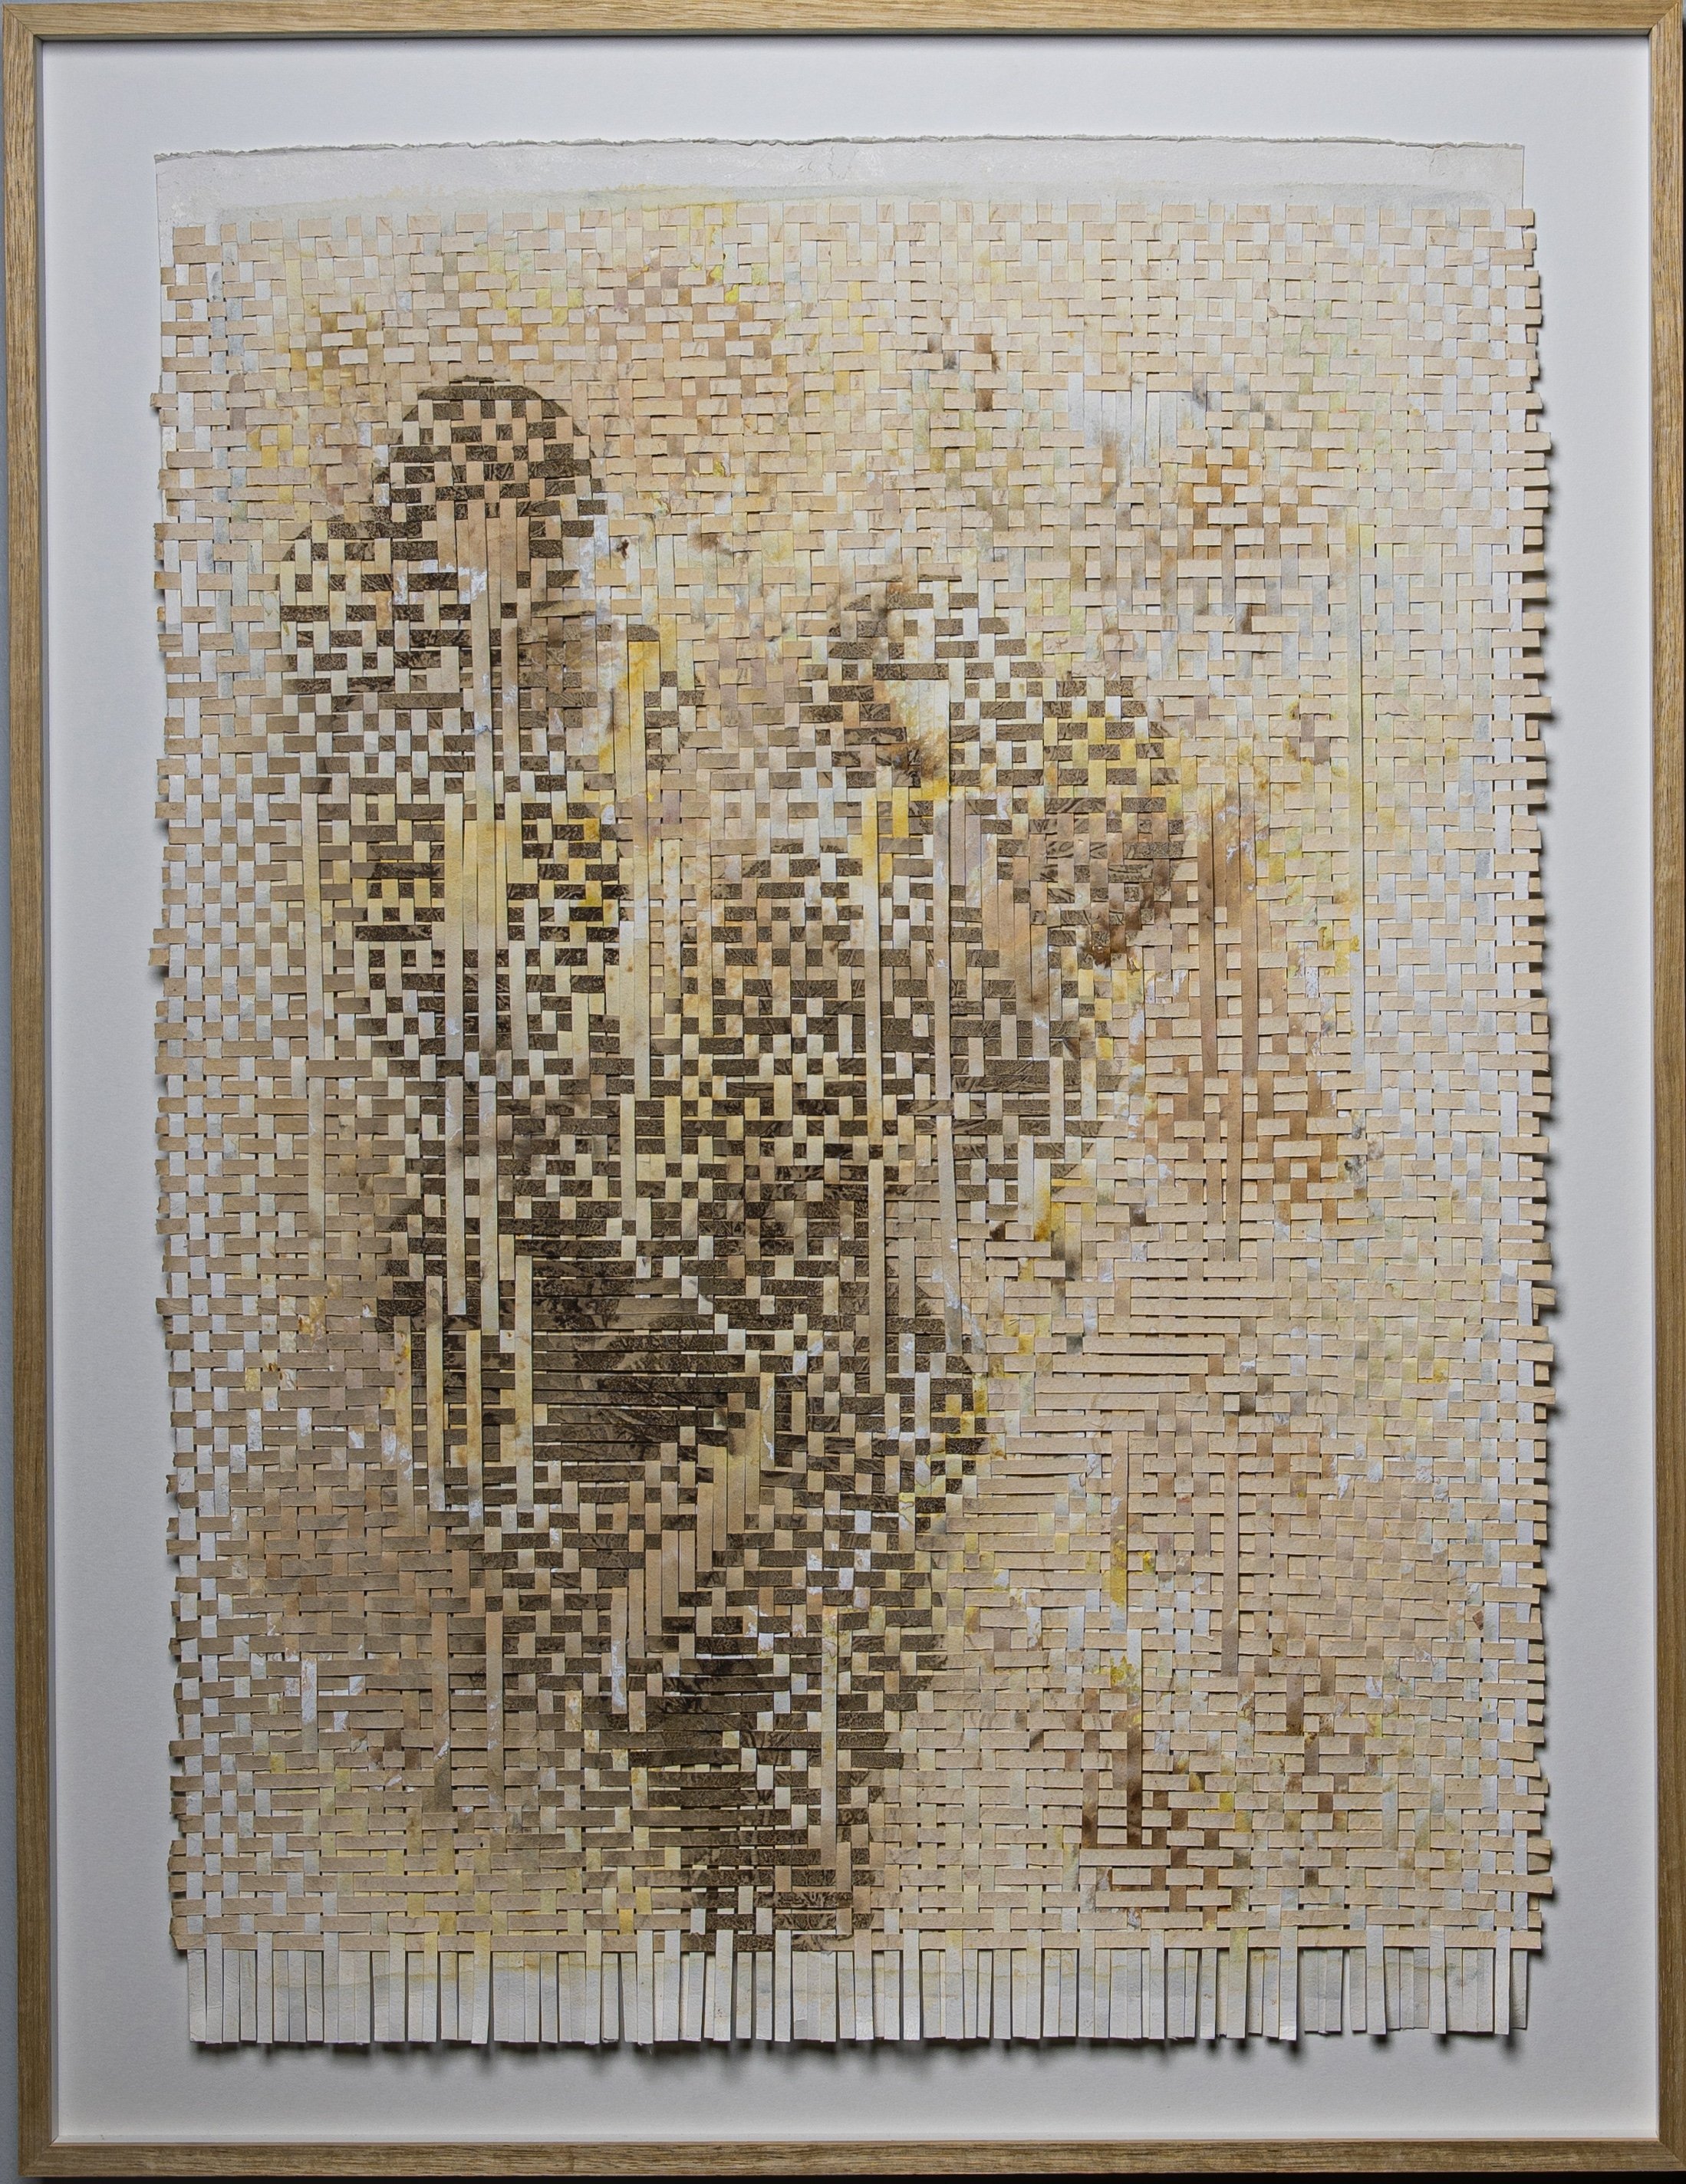 'Breath,' 2021, woven painting, cotton paper, natural ink from safflower and walnut, mineral salts, eucalyptus botanical print, 54.5 by 78 centimeters. (Courtesy of Umut Özge Balkan)